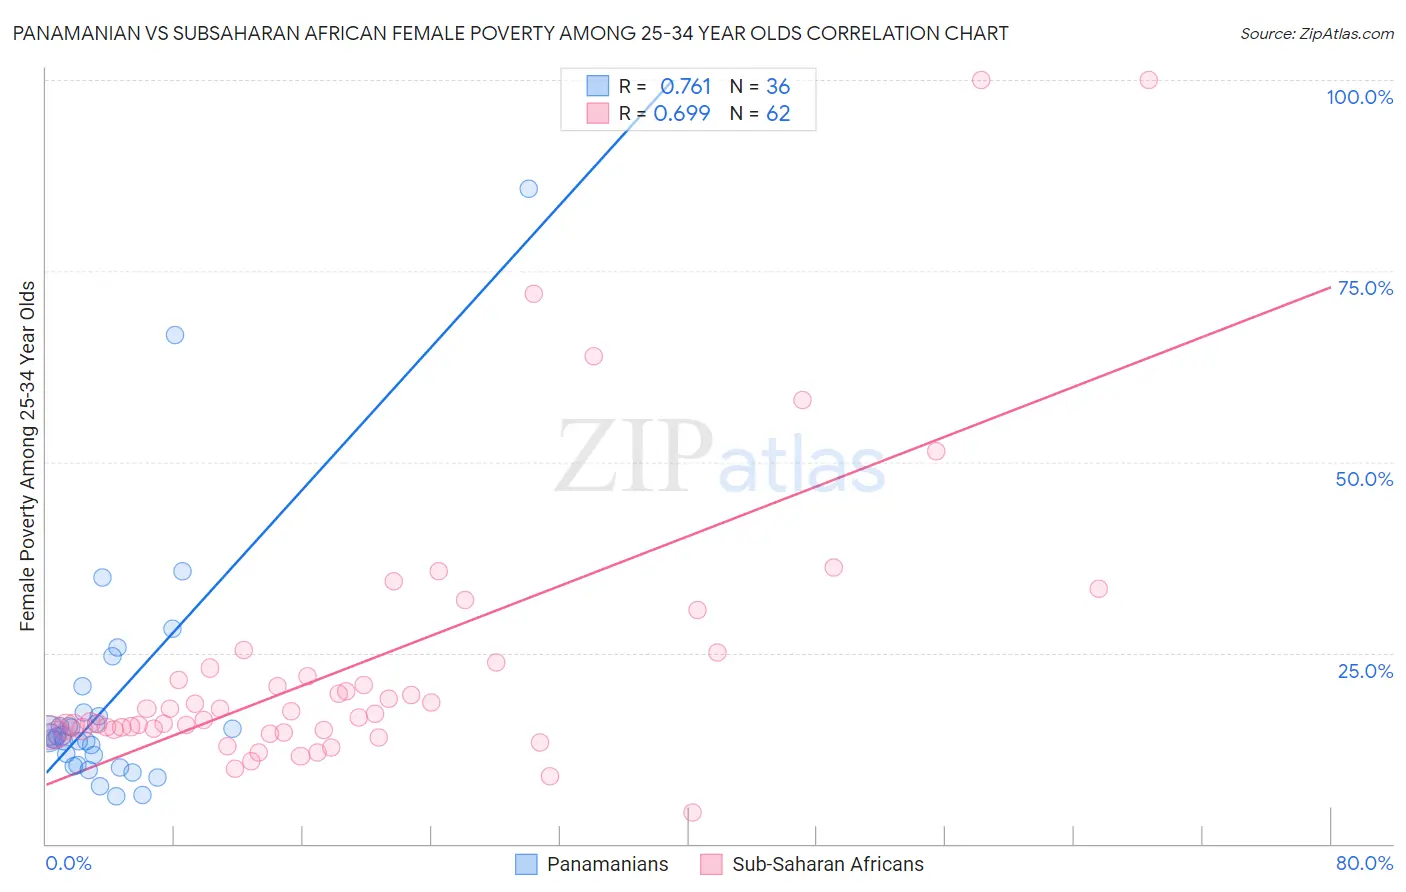 Panamanian vs Subsaharan African Female Poverty Among 25-34 Year Olds